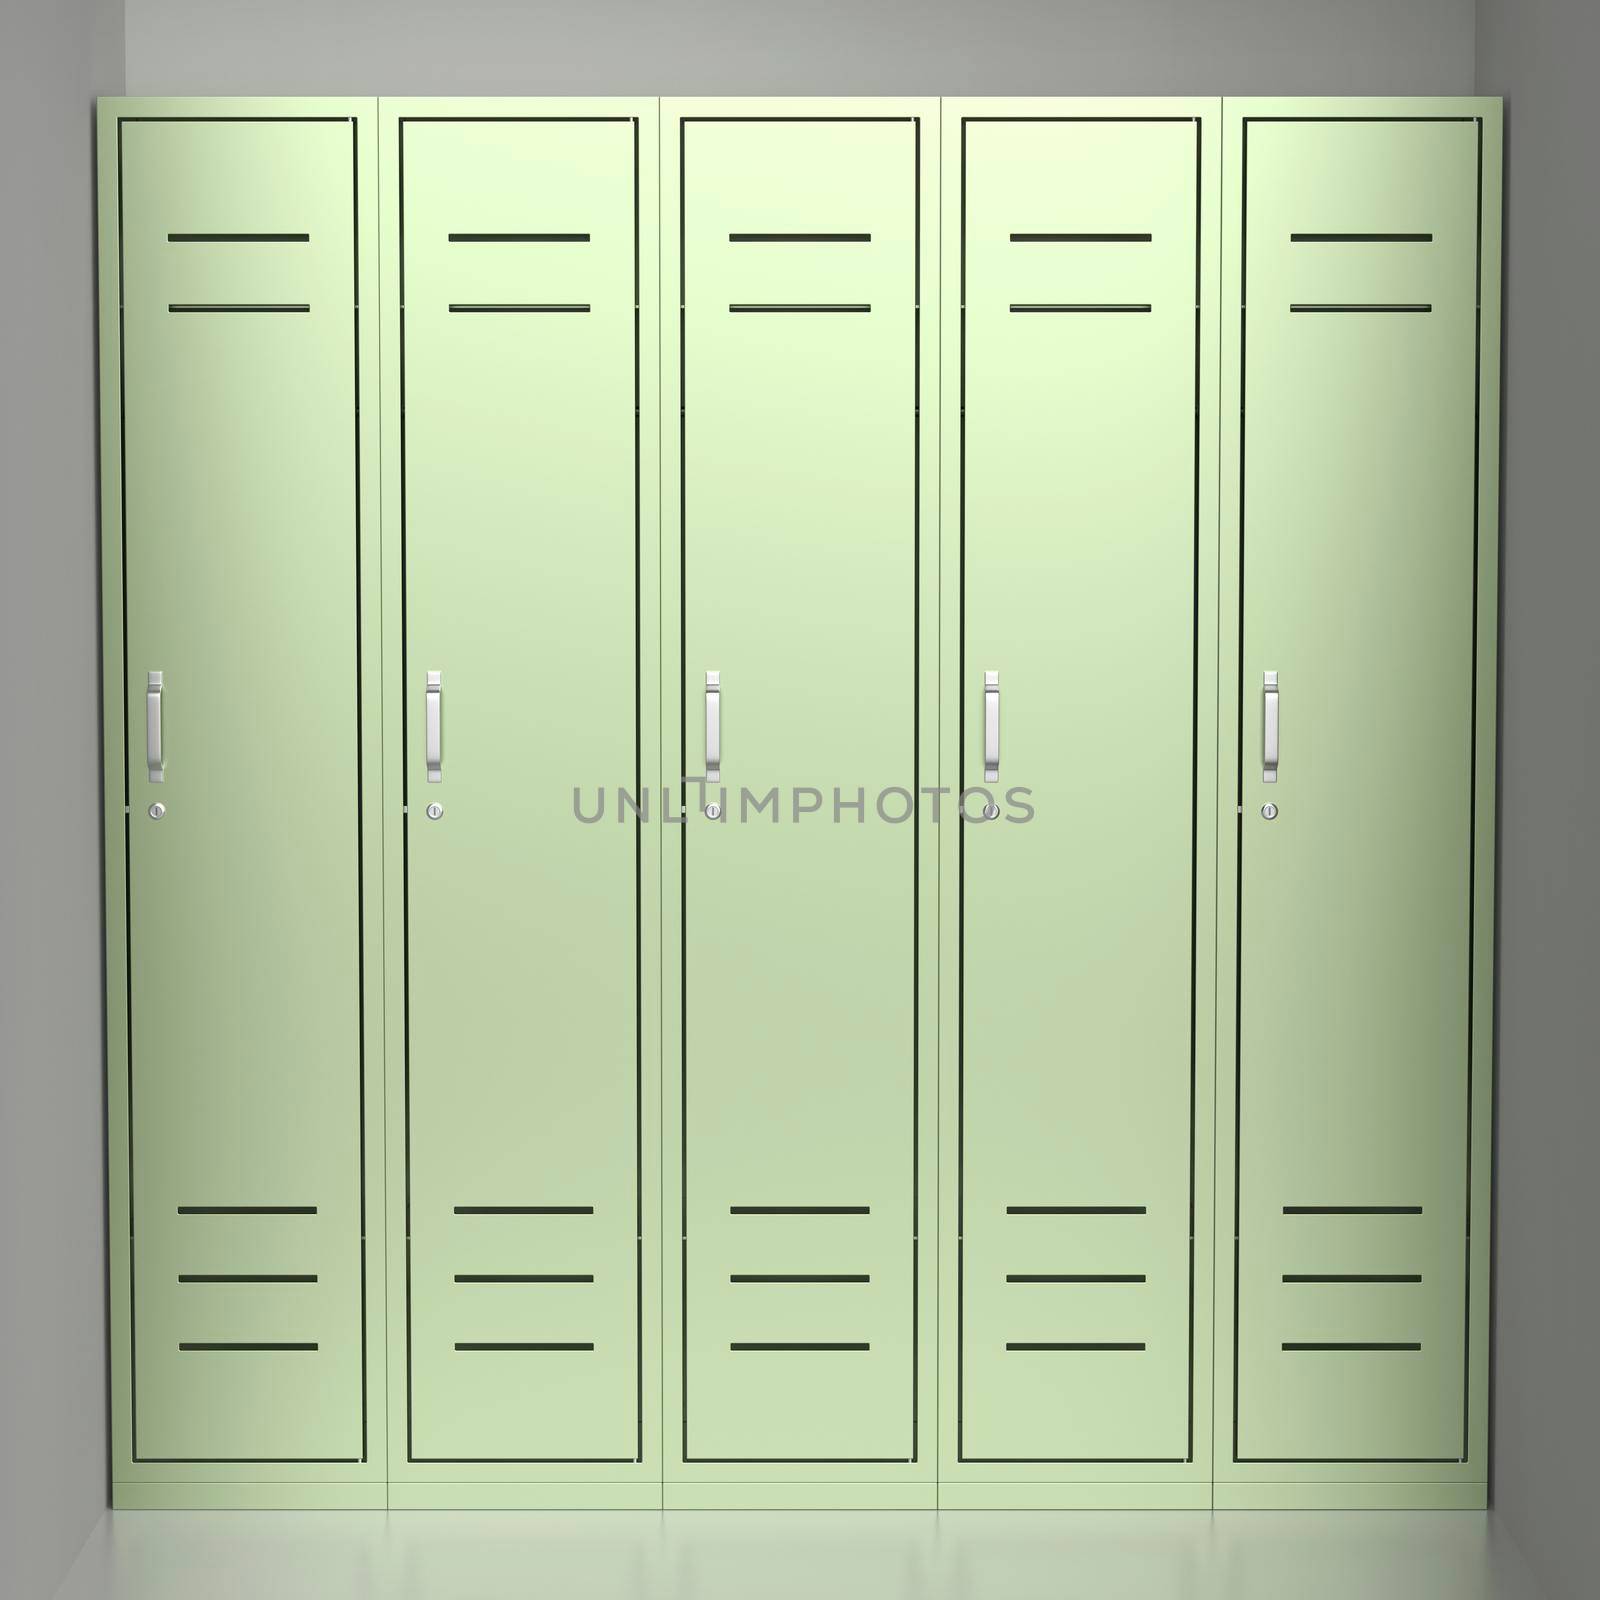 Five green metal lockers by magraphics